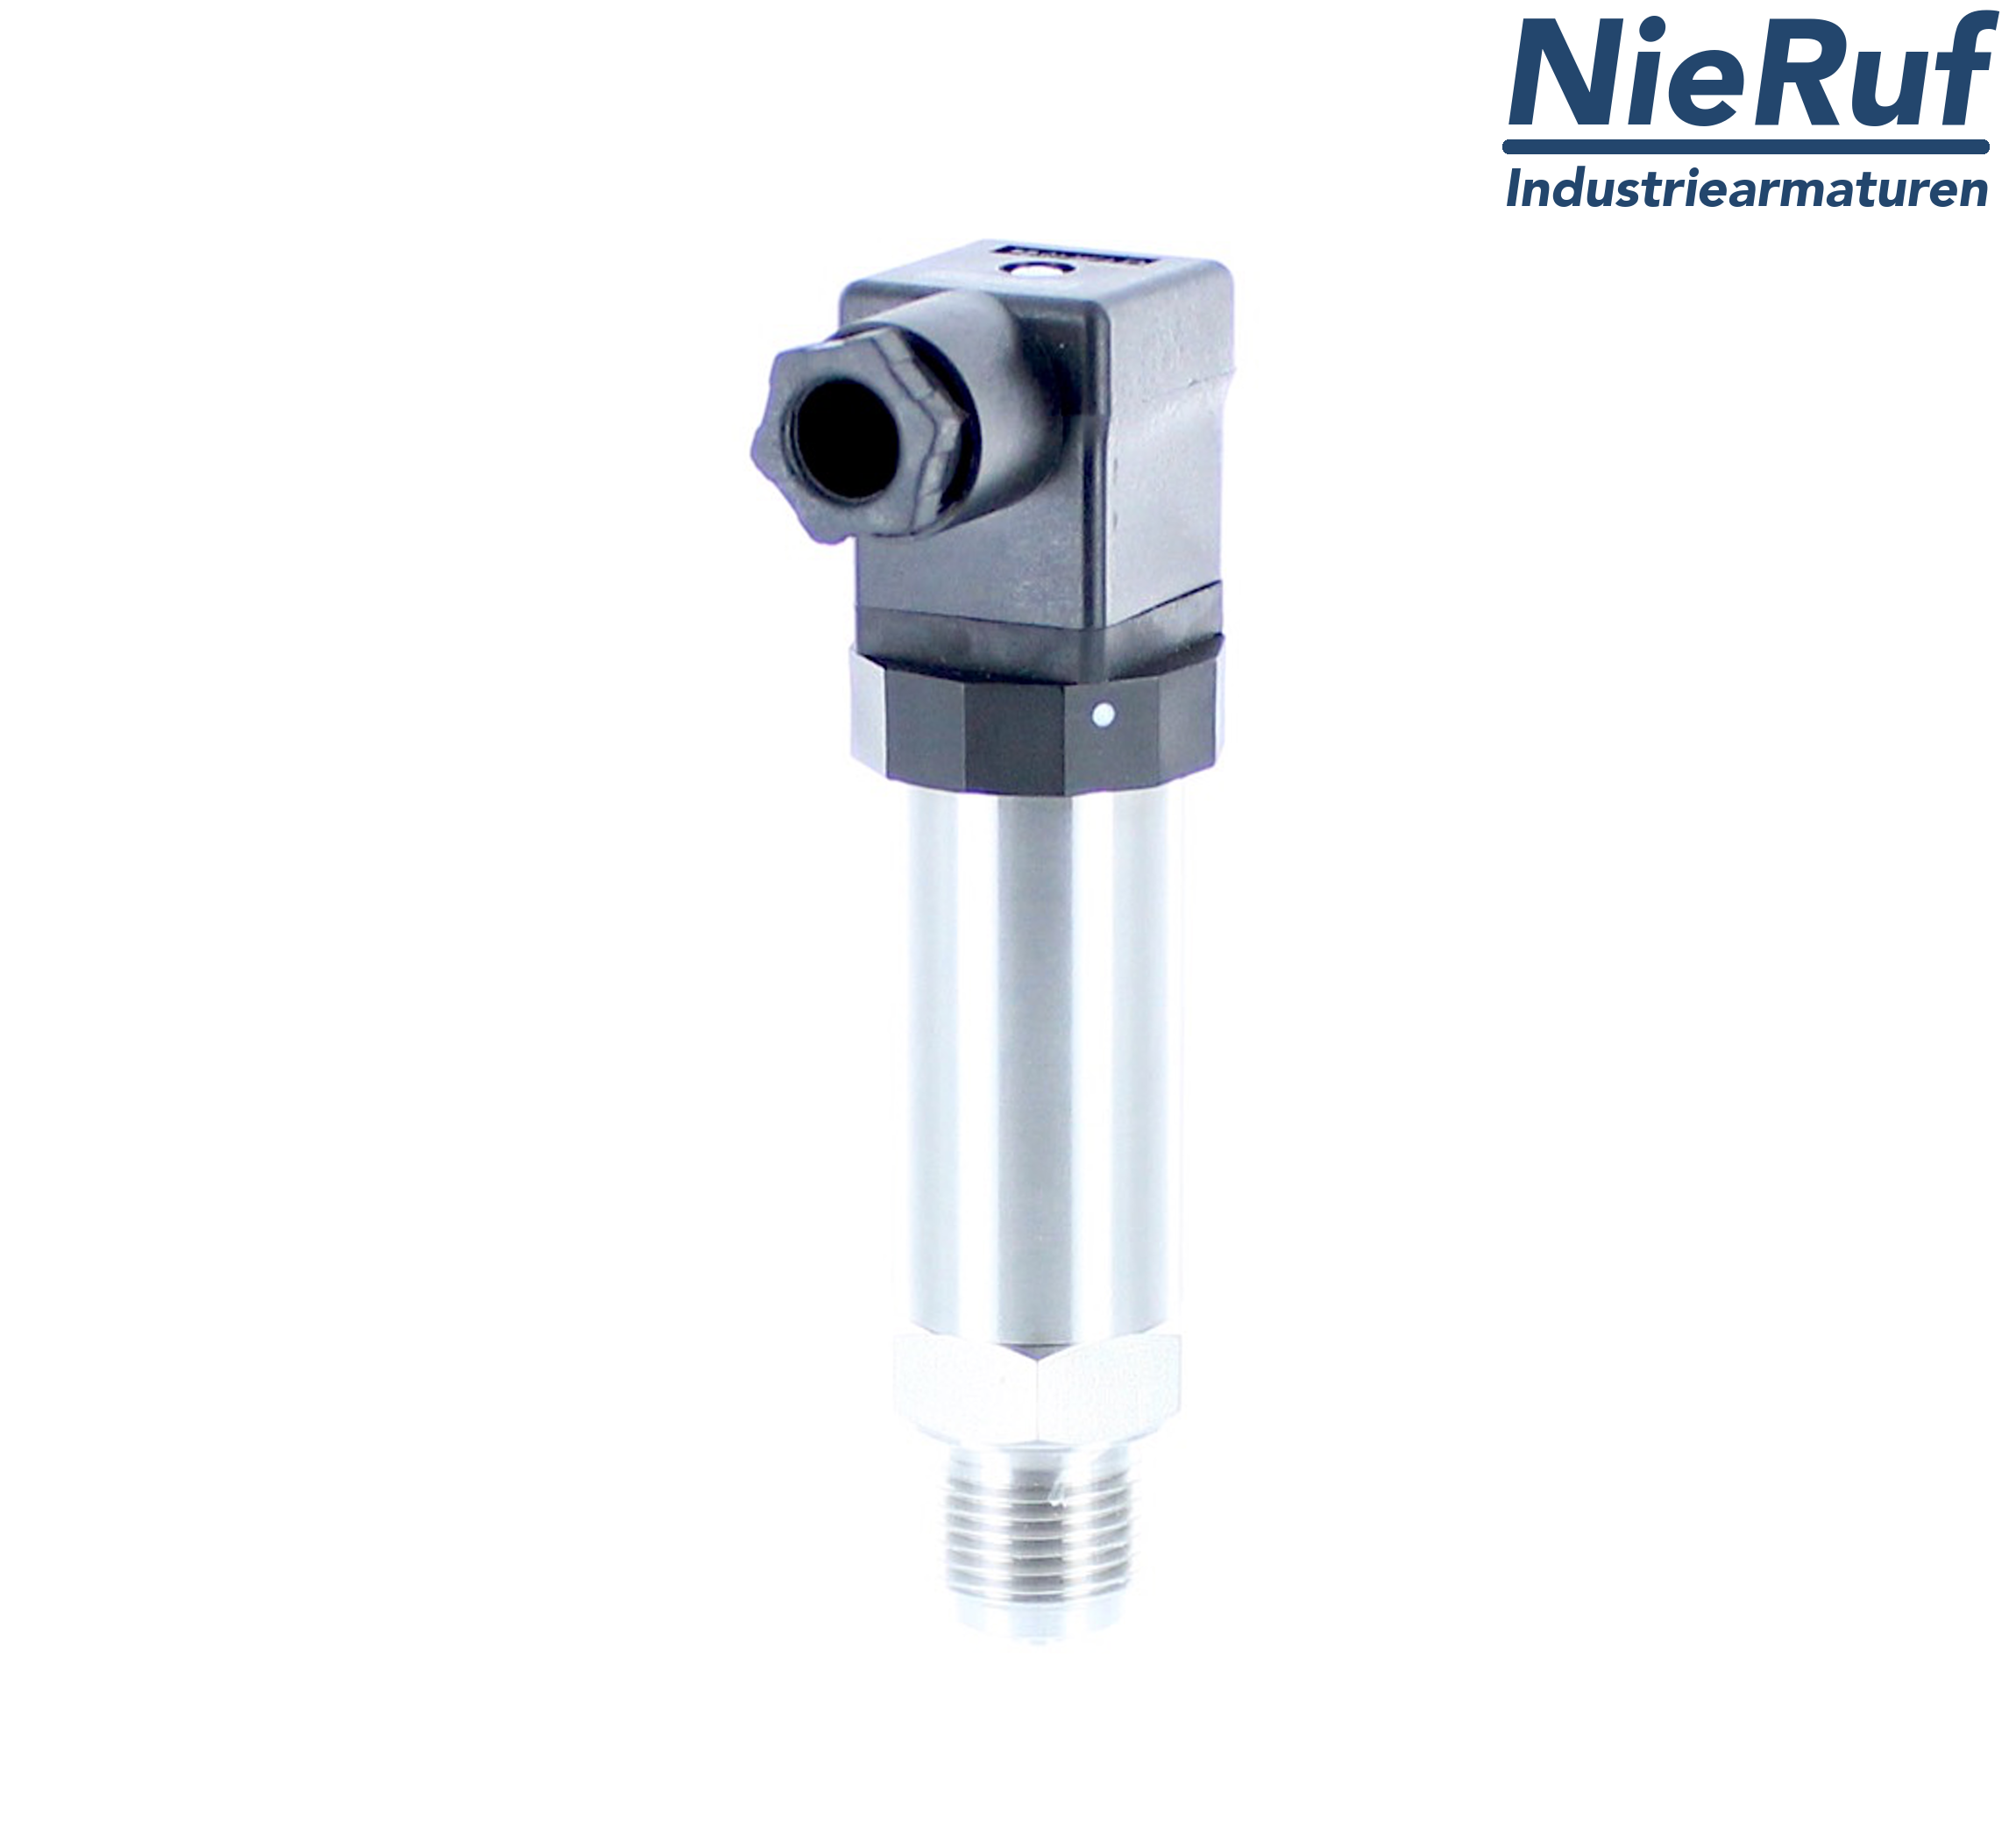 pressure sensor G 1/4" B DS01 stainless steel 2-wire: 4-20mA FPM 0,0 - 2,5 bar